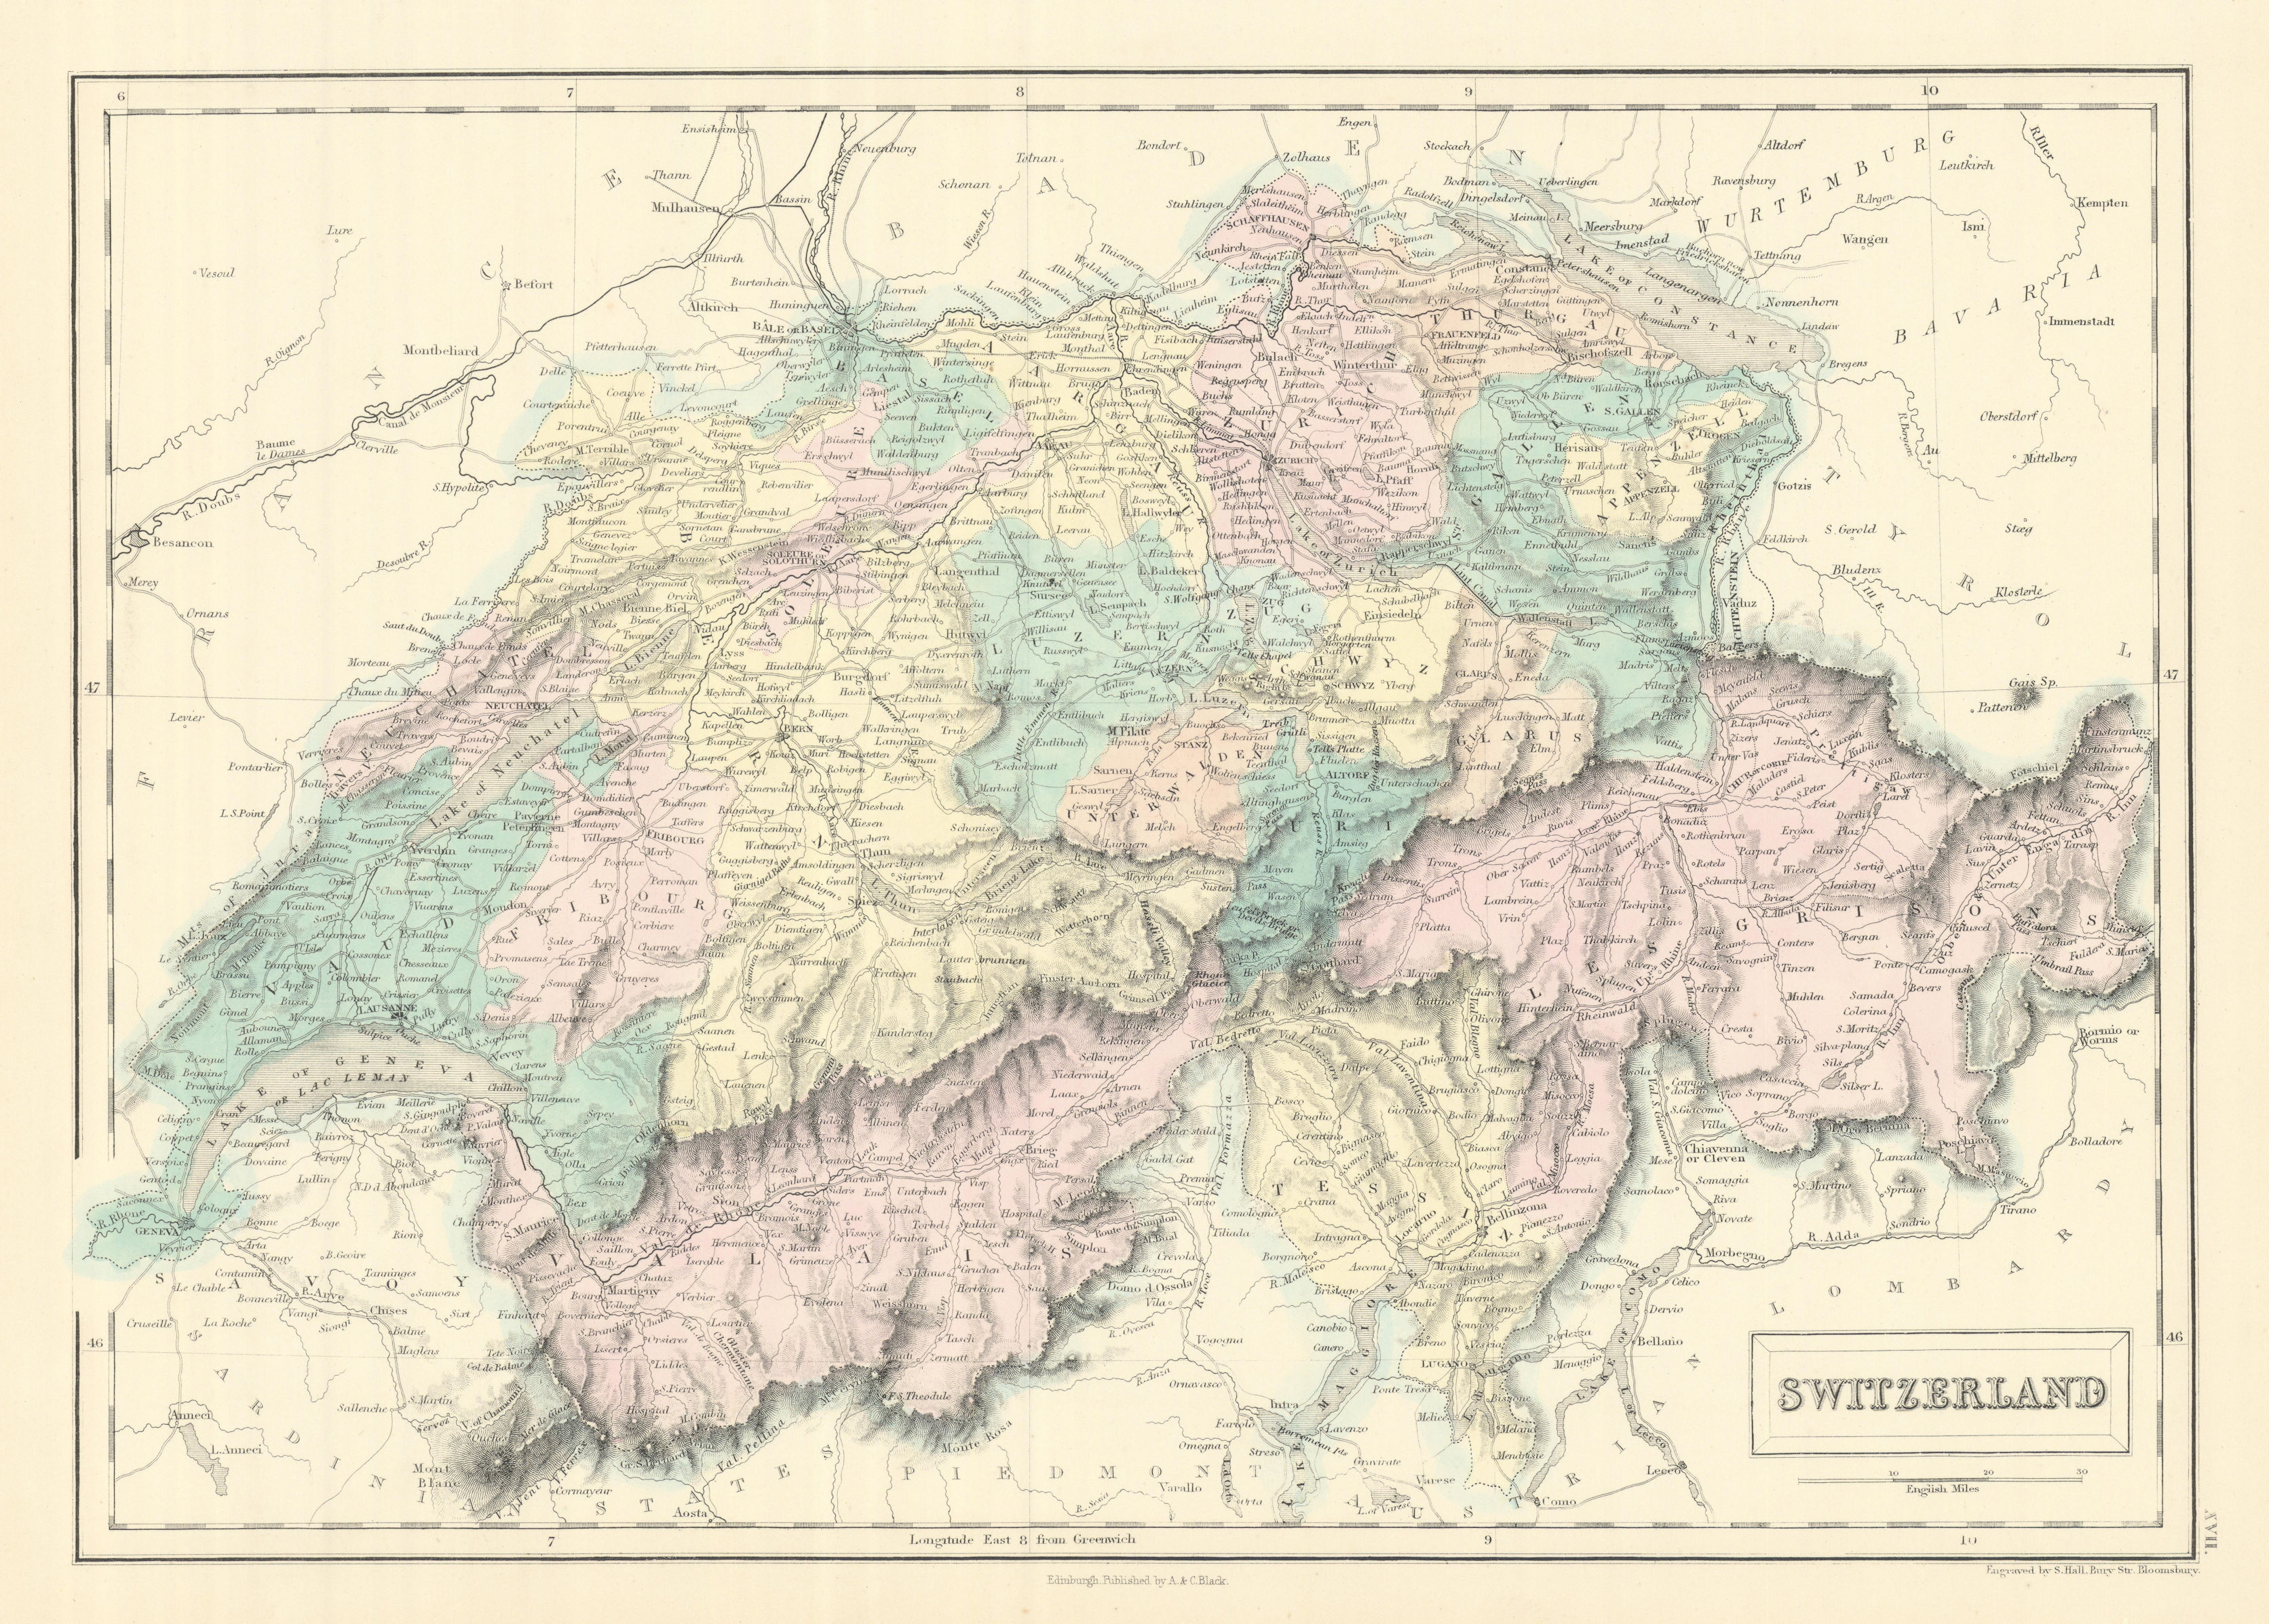 Associate Product Switzerland showing cantons, rivers & roads. SIDNEY HALL 1854 old antique map